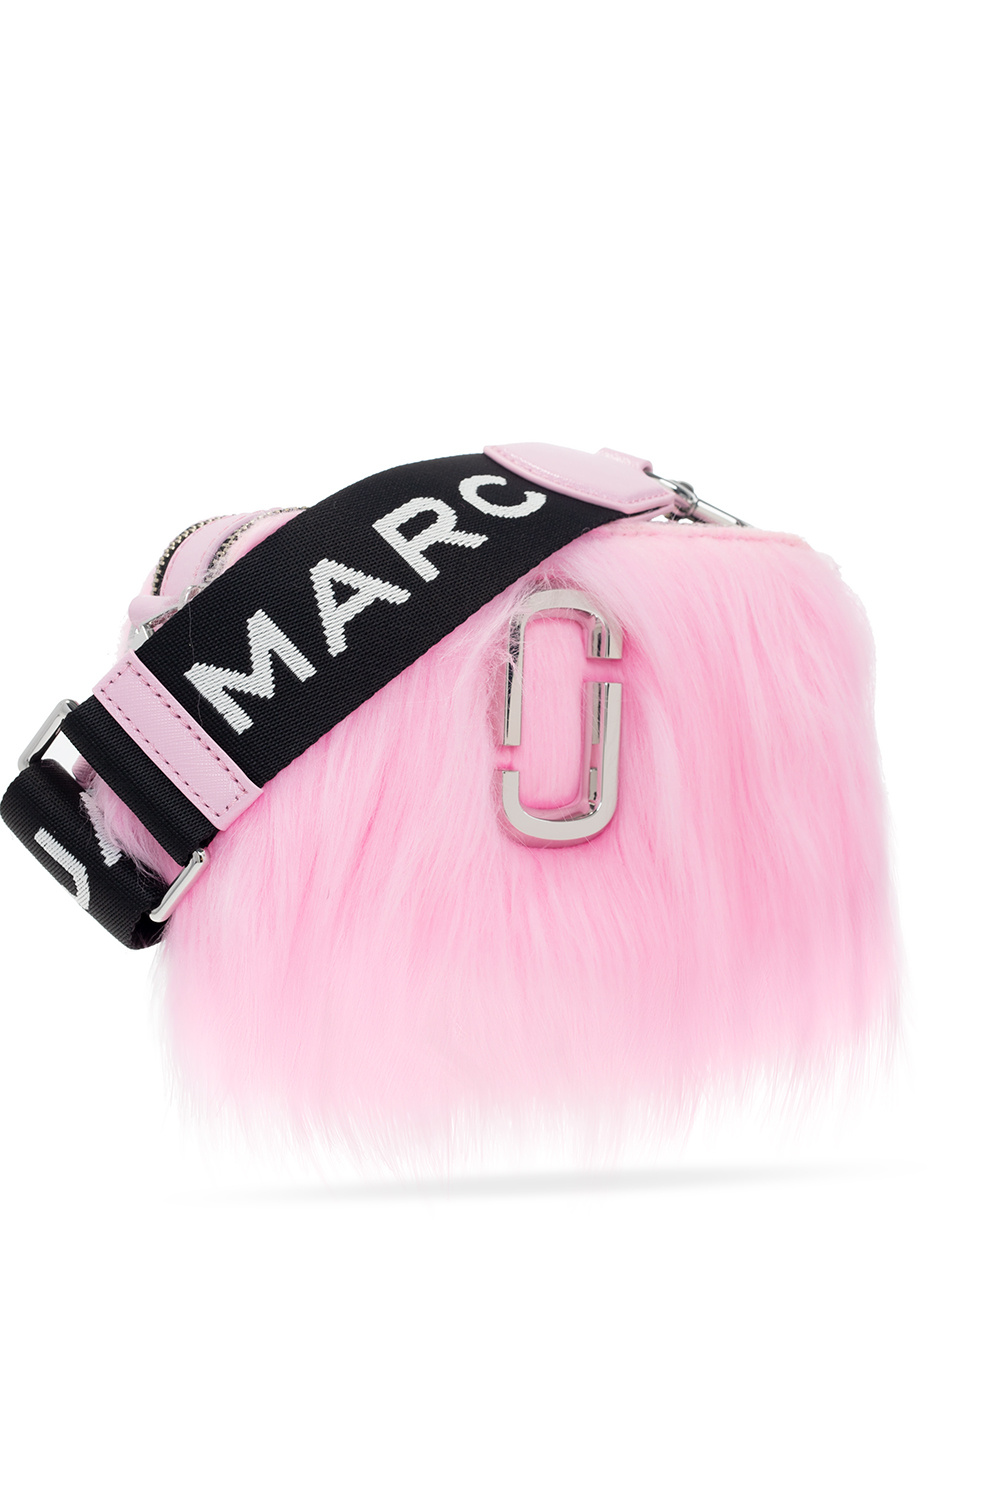 Marc Jacobs marc by marc jacobs small snapshot umhangetasche weiss rot und navy;